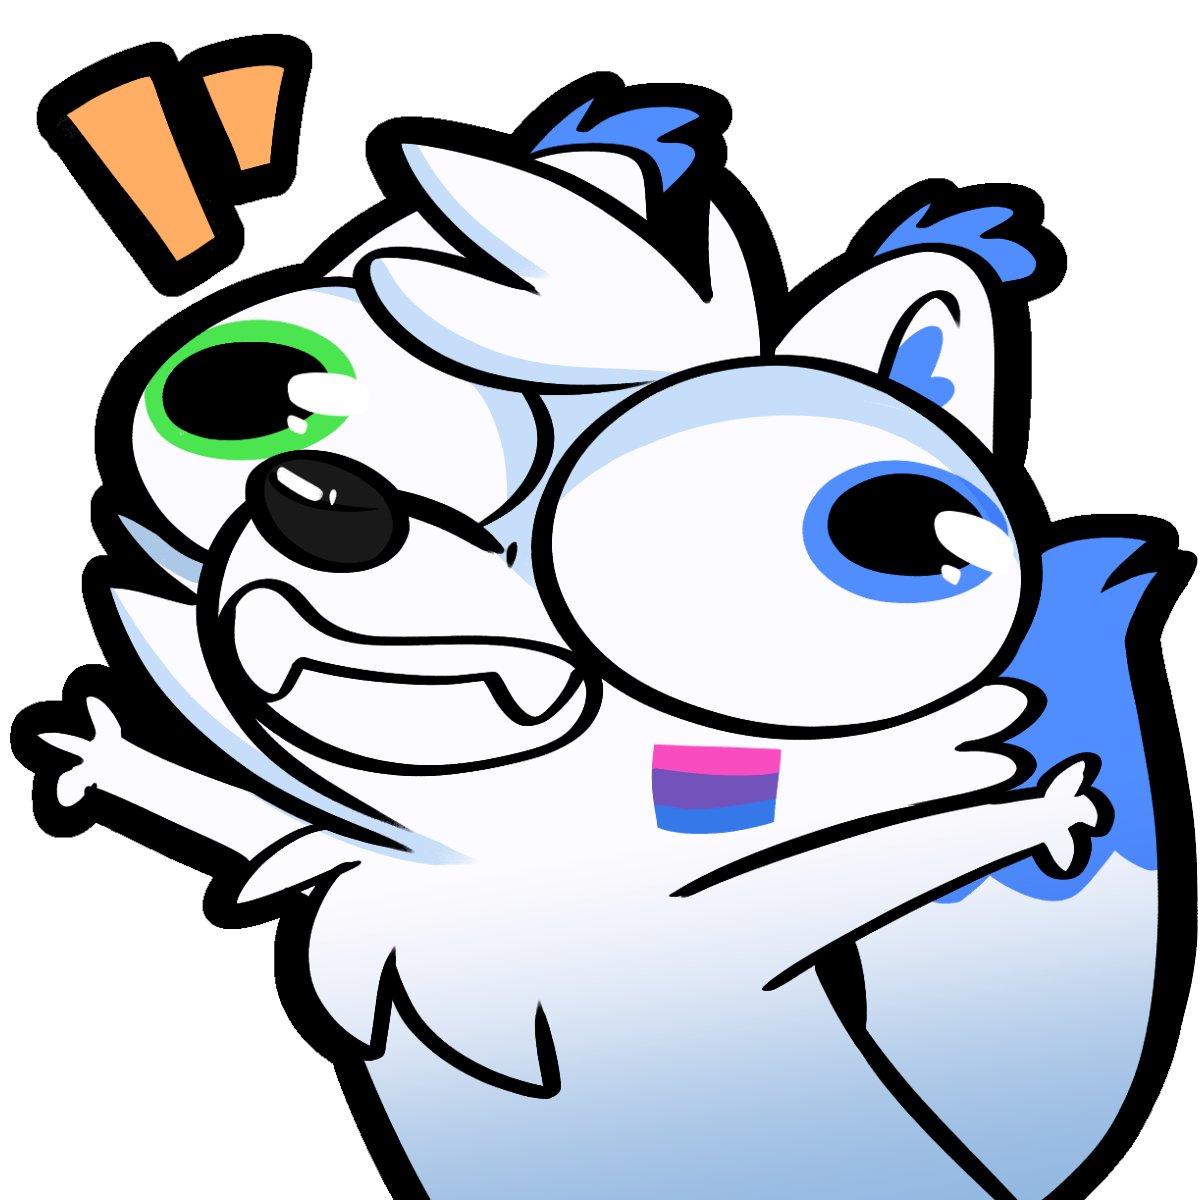 🔥Need a new emote?! 🔥

Sub tier 3 on my Twitch & get yourself a custom emote for your channel! 💙 Only $25! 

Sub tier 3 ➡️support partner plus grind➡️ get a custom emote! 
🛑gift subs NOT eligible!

RTs appreciated! 🥰
#partnerplus #plus #twitchstream #emotes